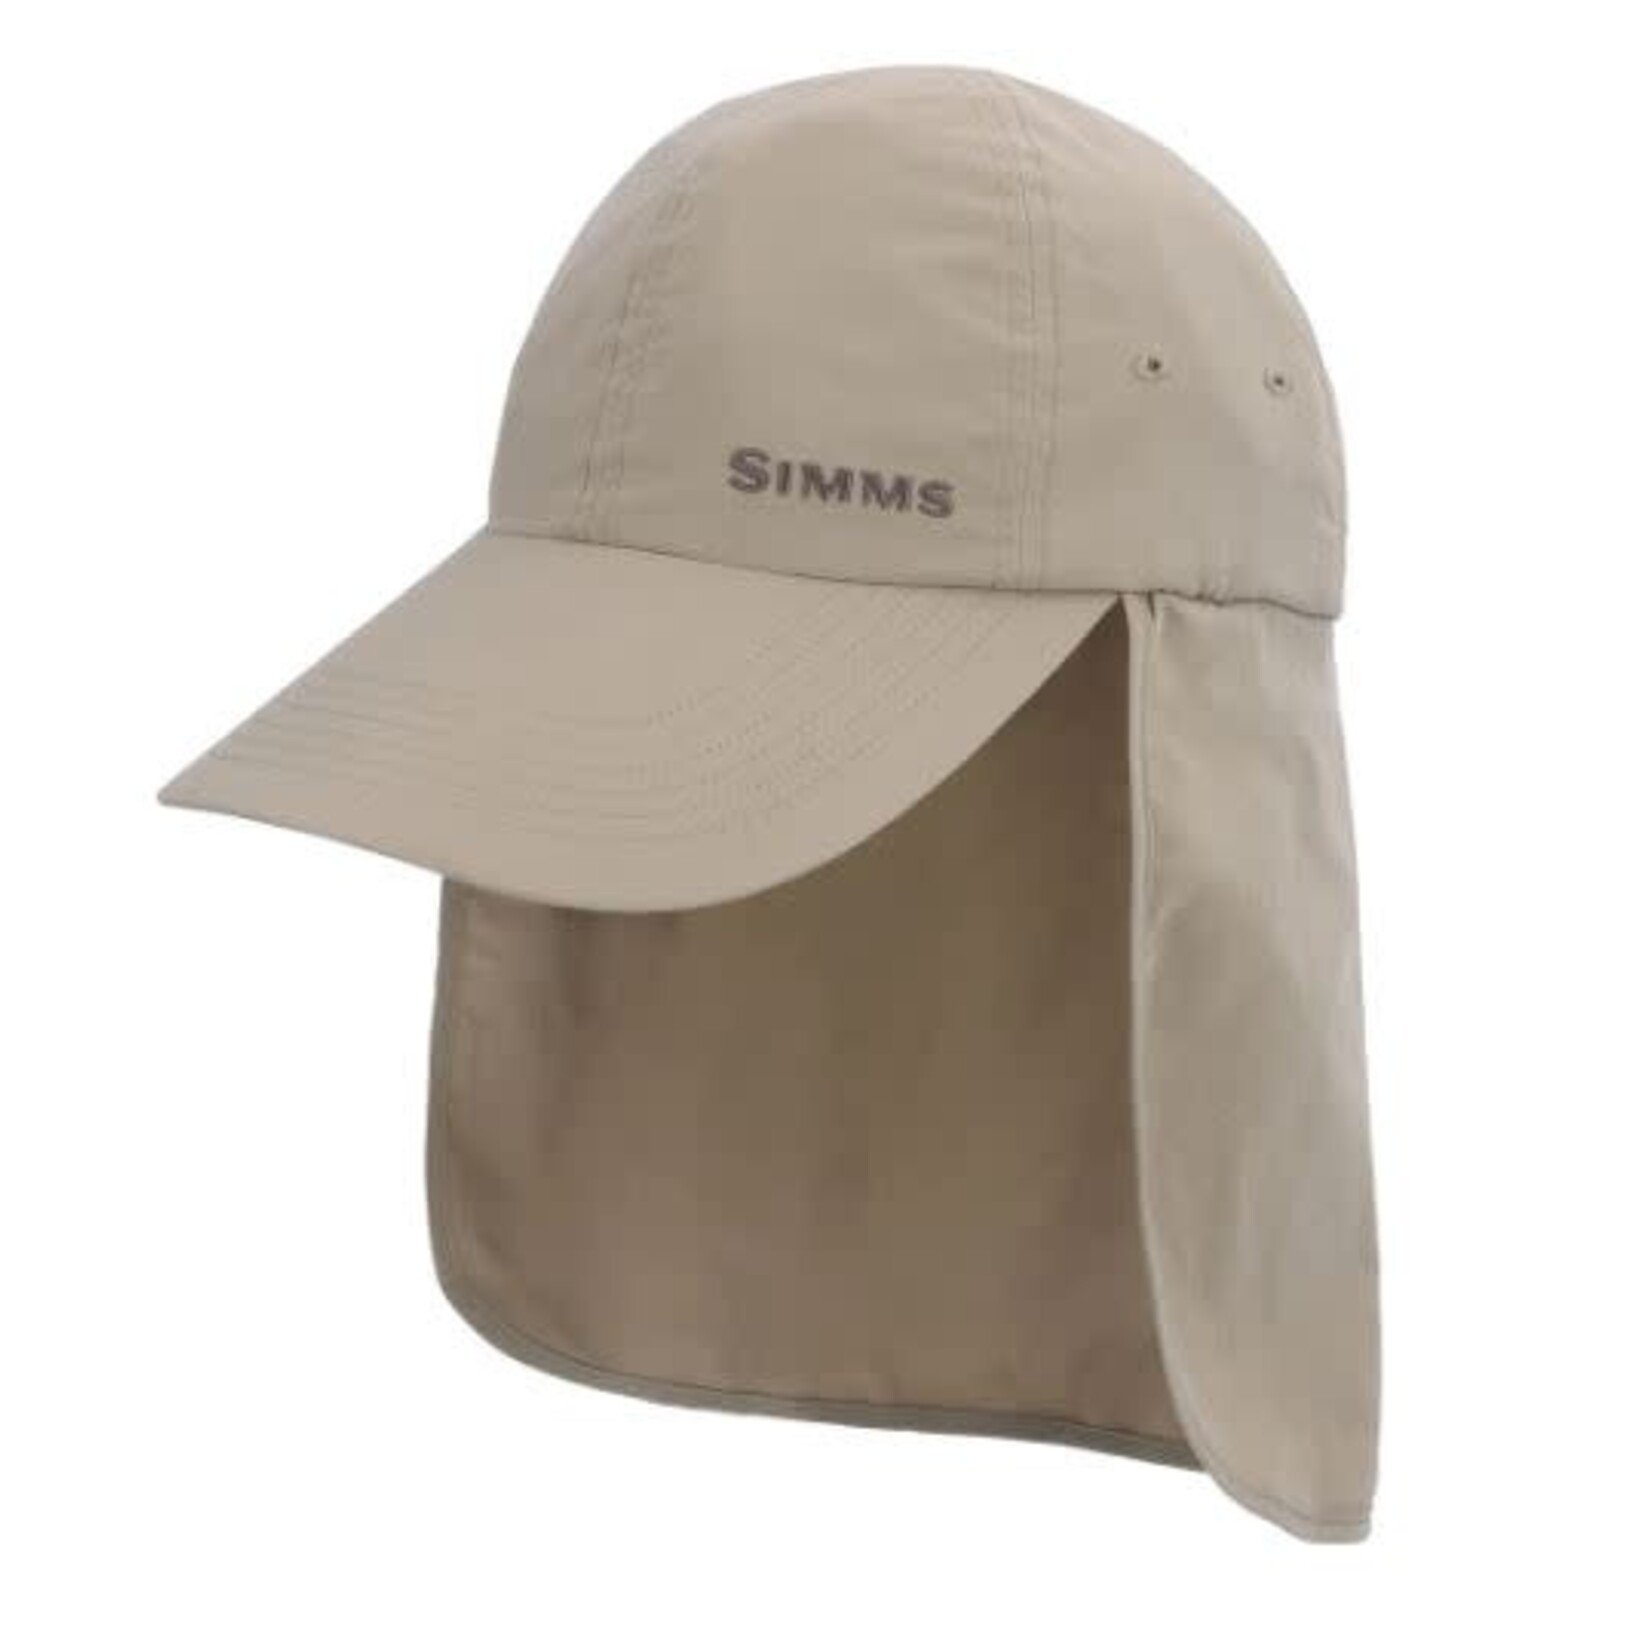 S23 Simms BugStopper SunShield Cap Stone One Size